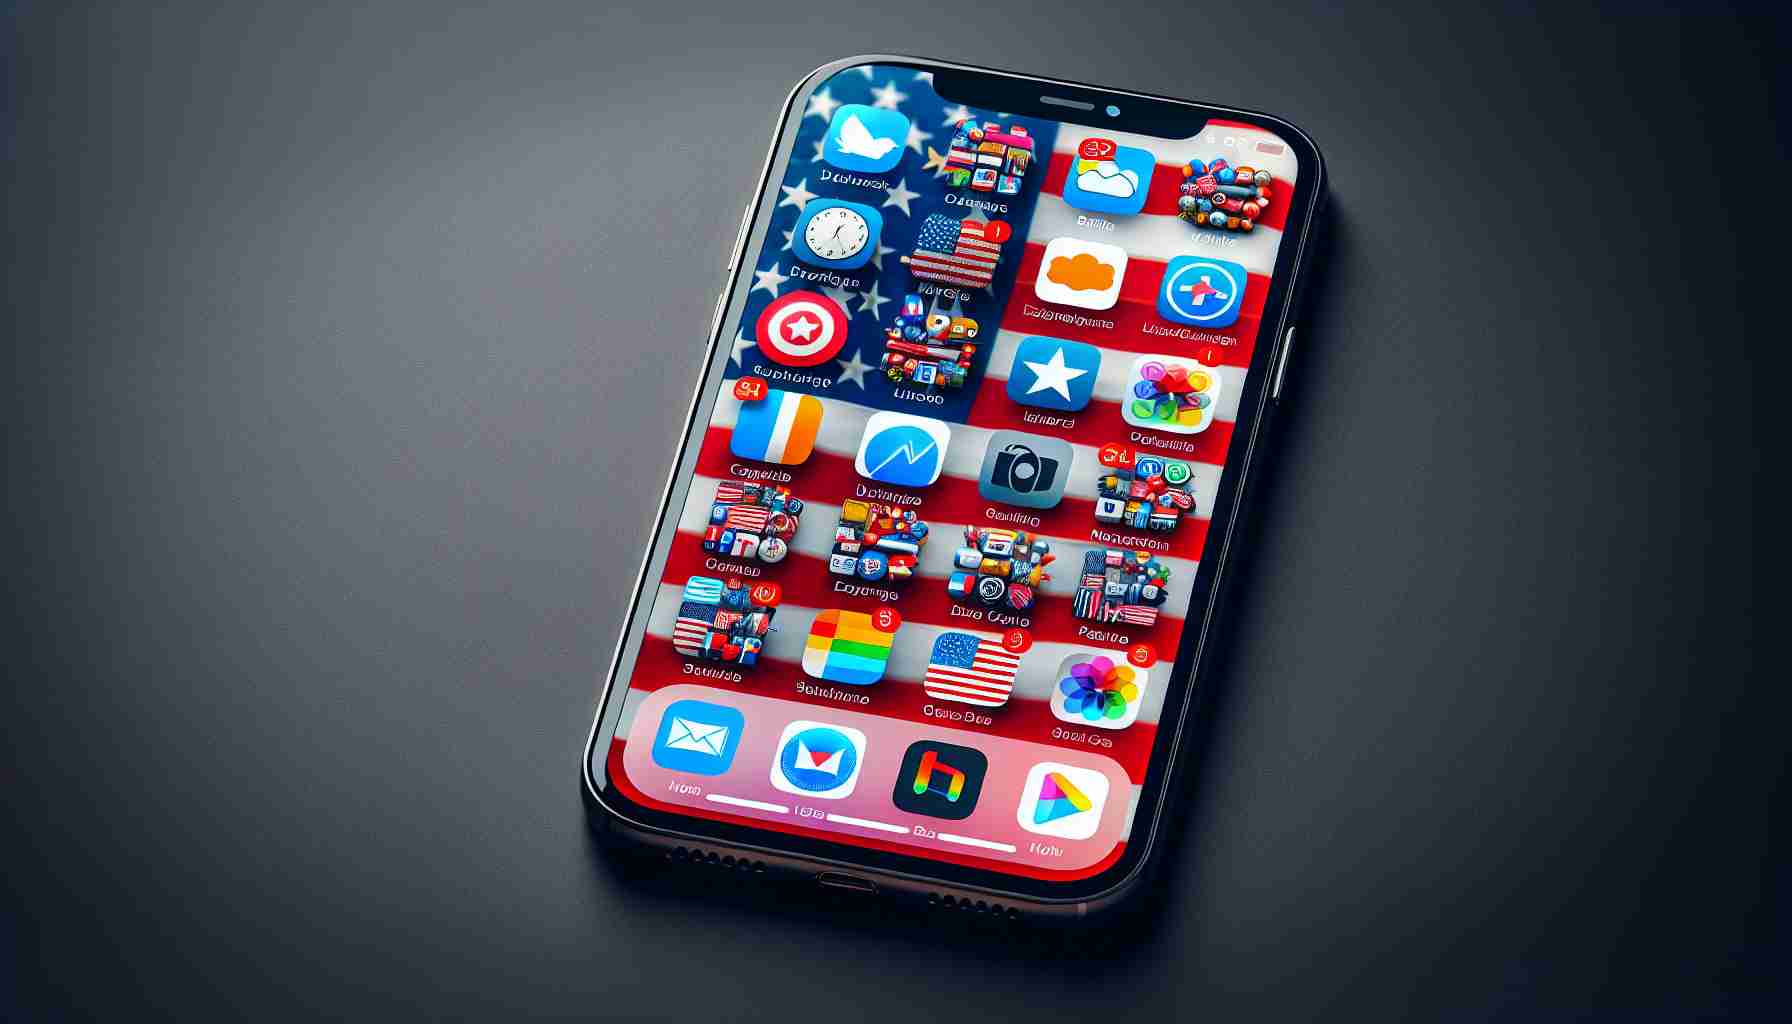 Most popular apps on iPhone in US